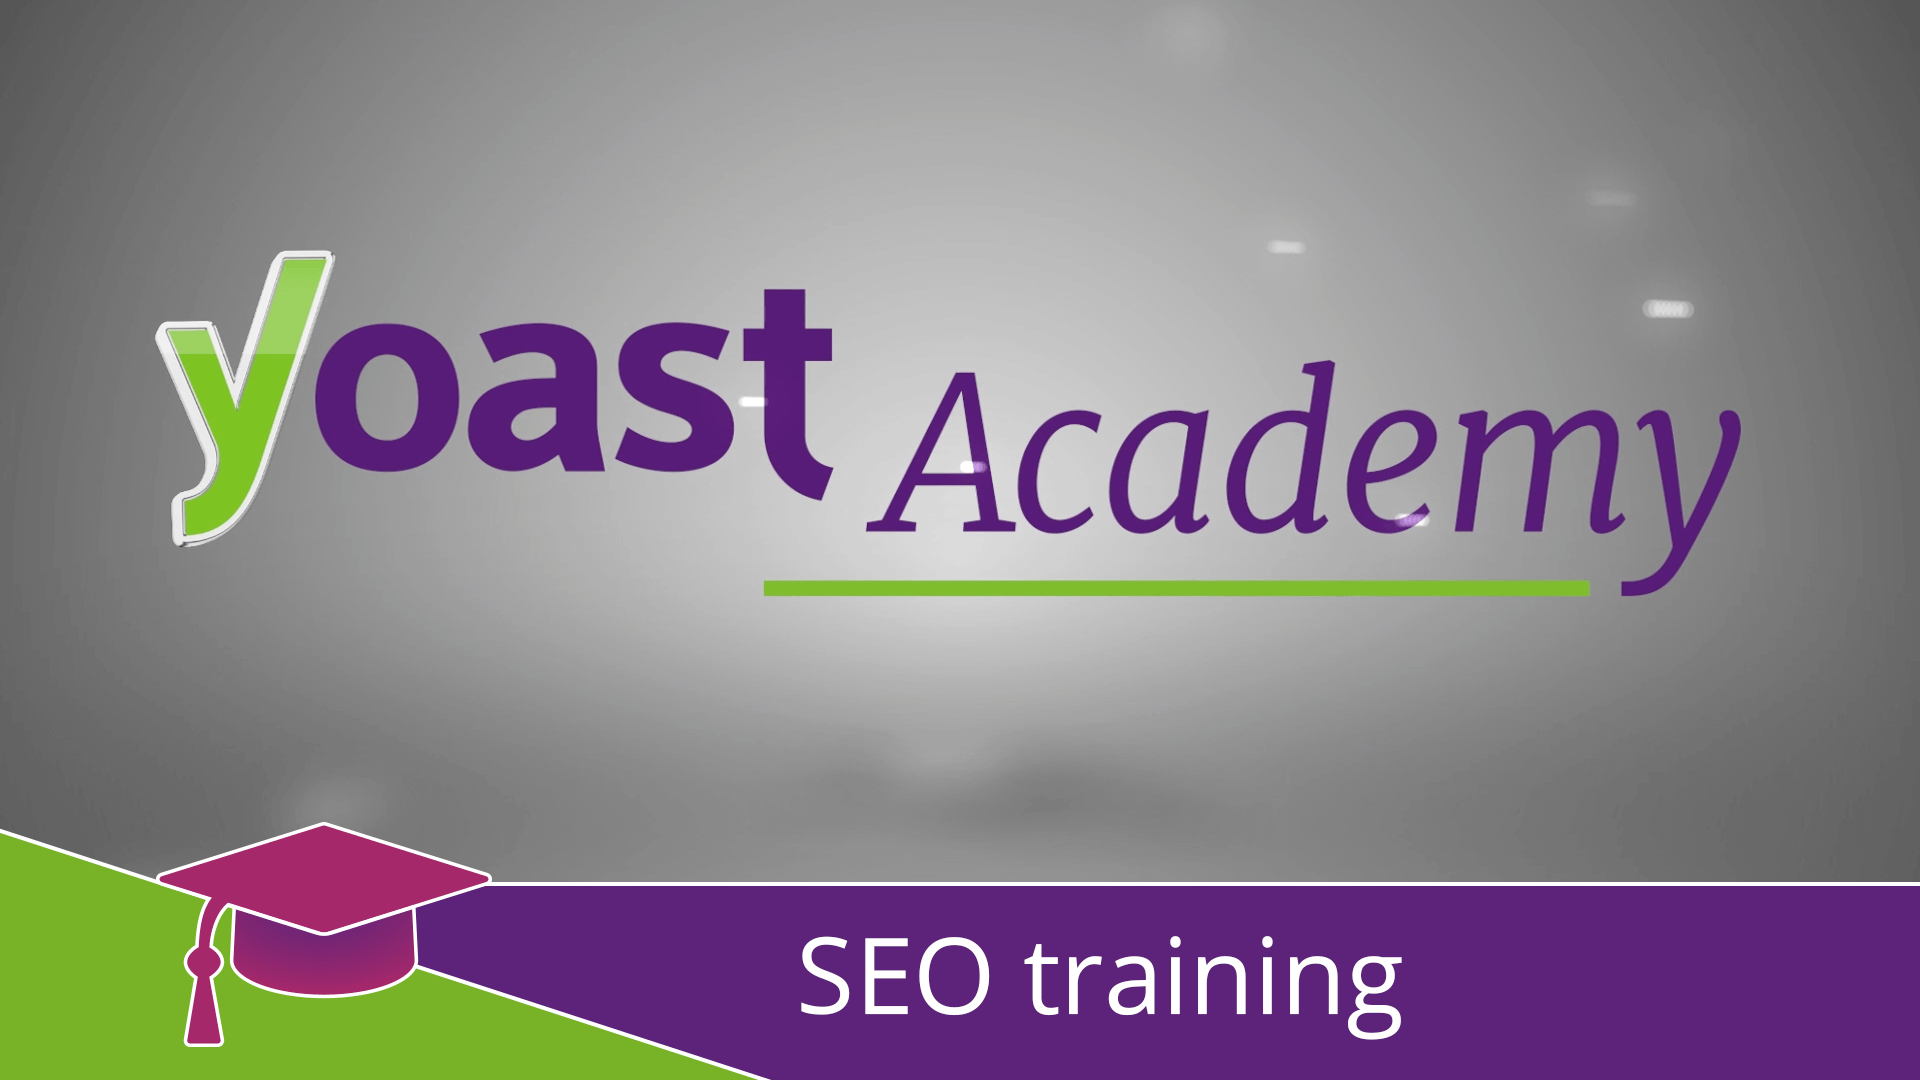 How To Get Yoast Academy Courses Free of Cost